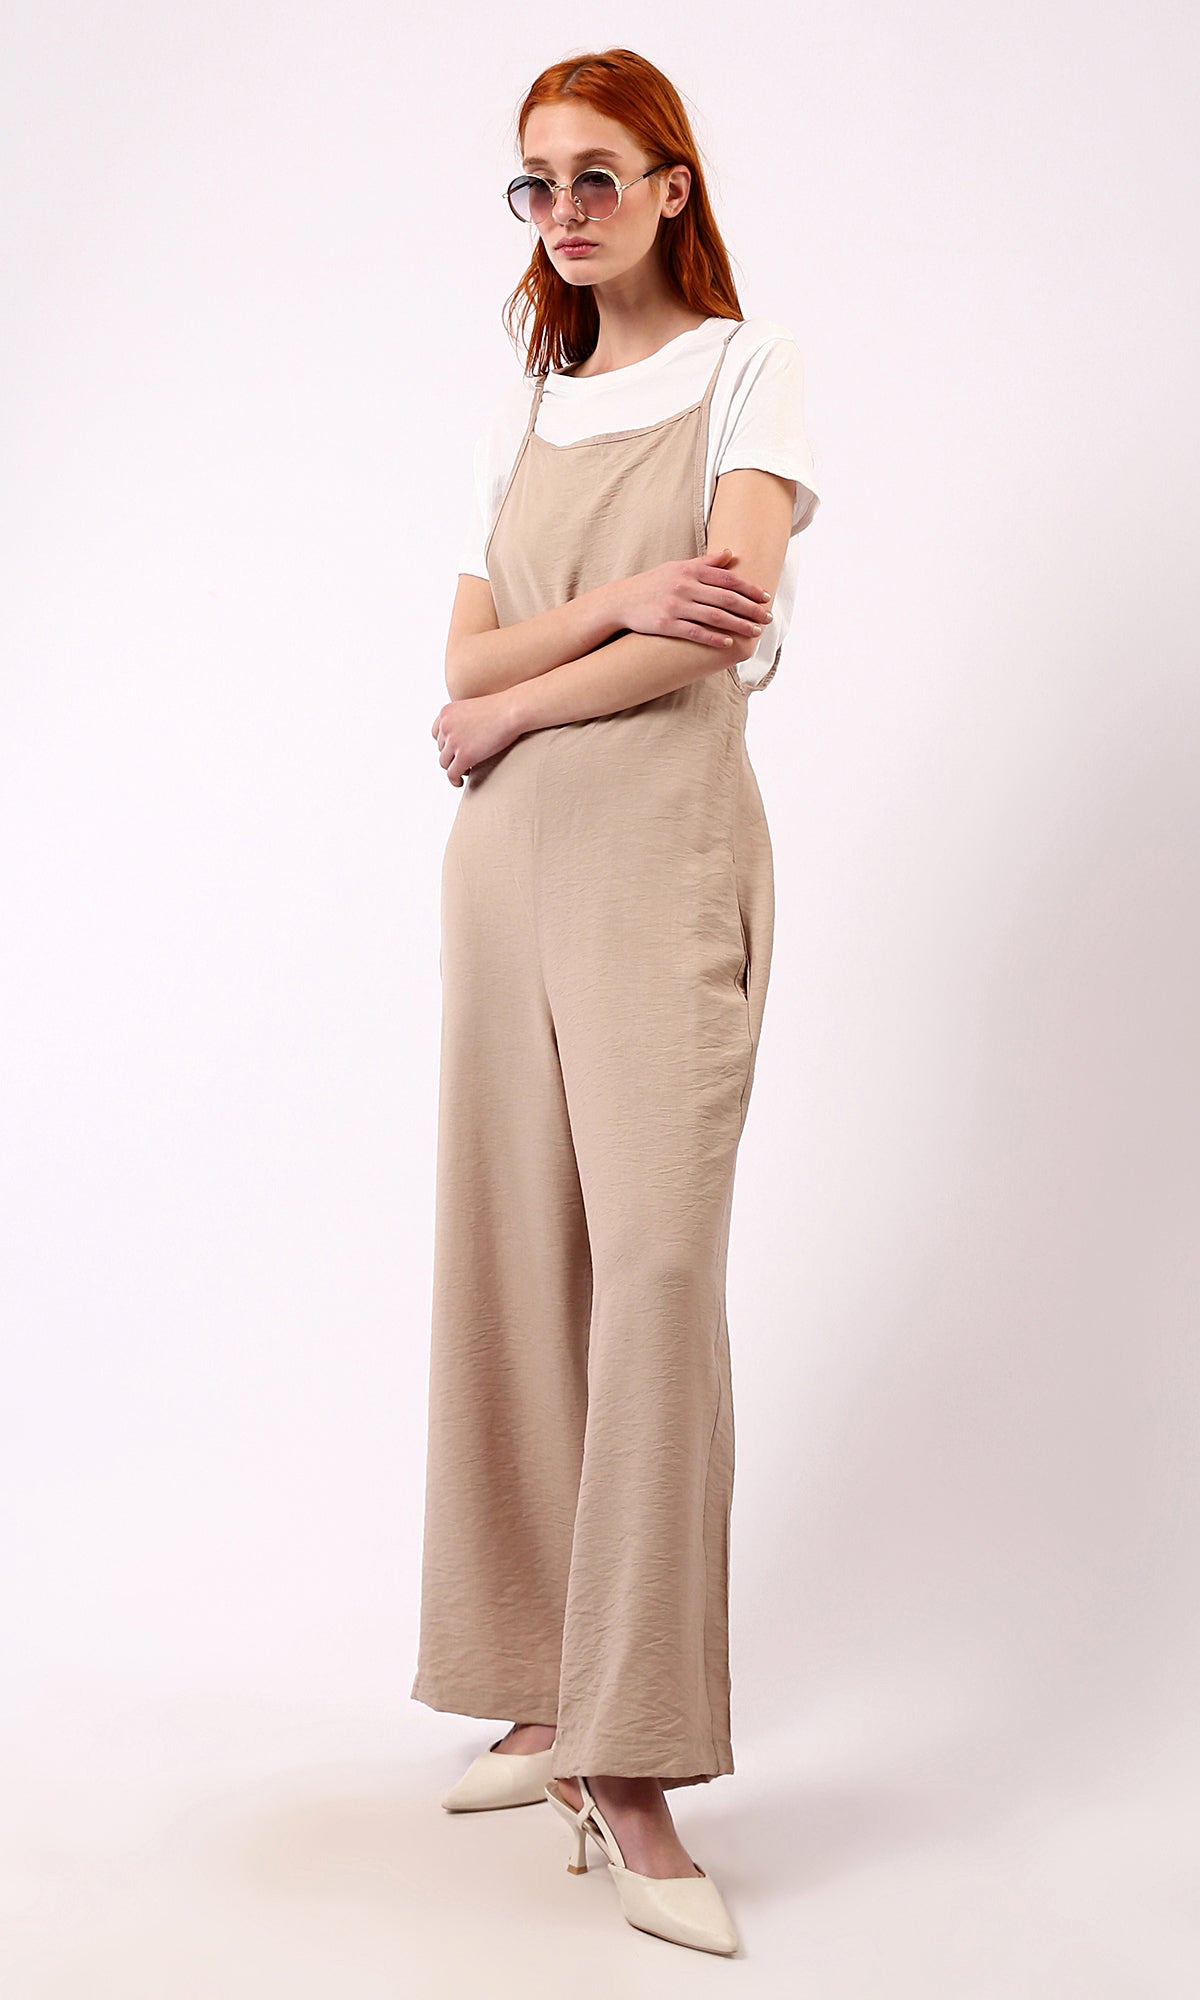 O181650 Square Neck Sleeveless Trendy Relaxed Jumpsuit - Light Coffee